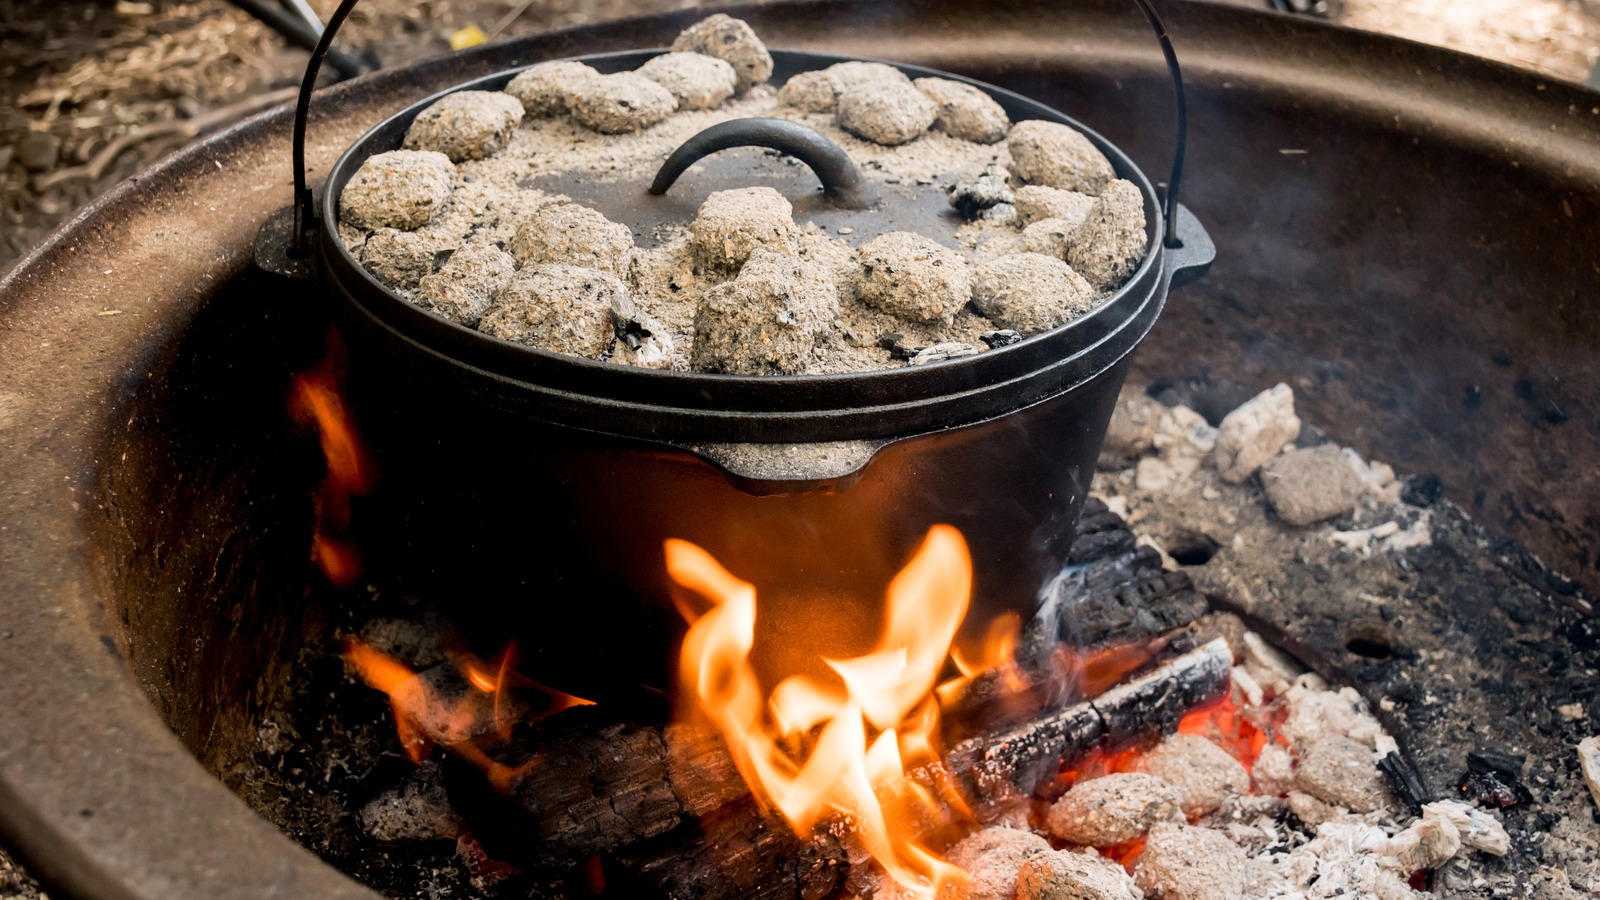 Cooking Class: How to Fry in Dutch Ovens and Skillets